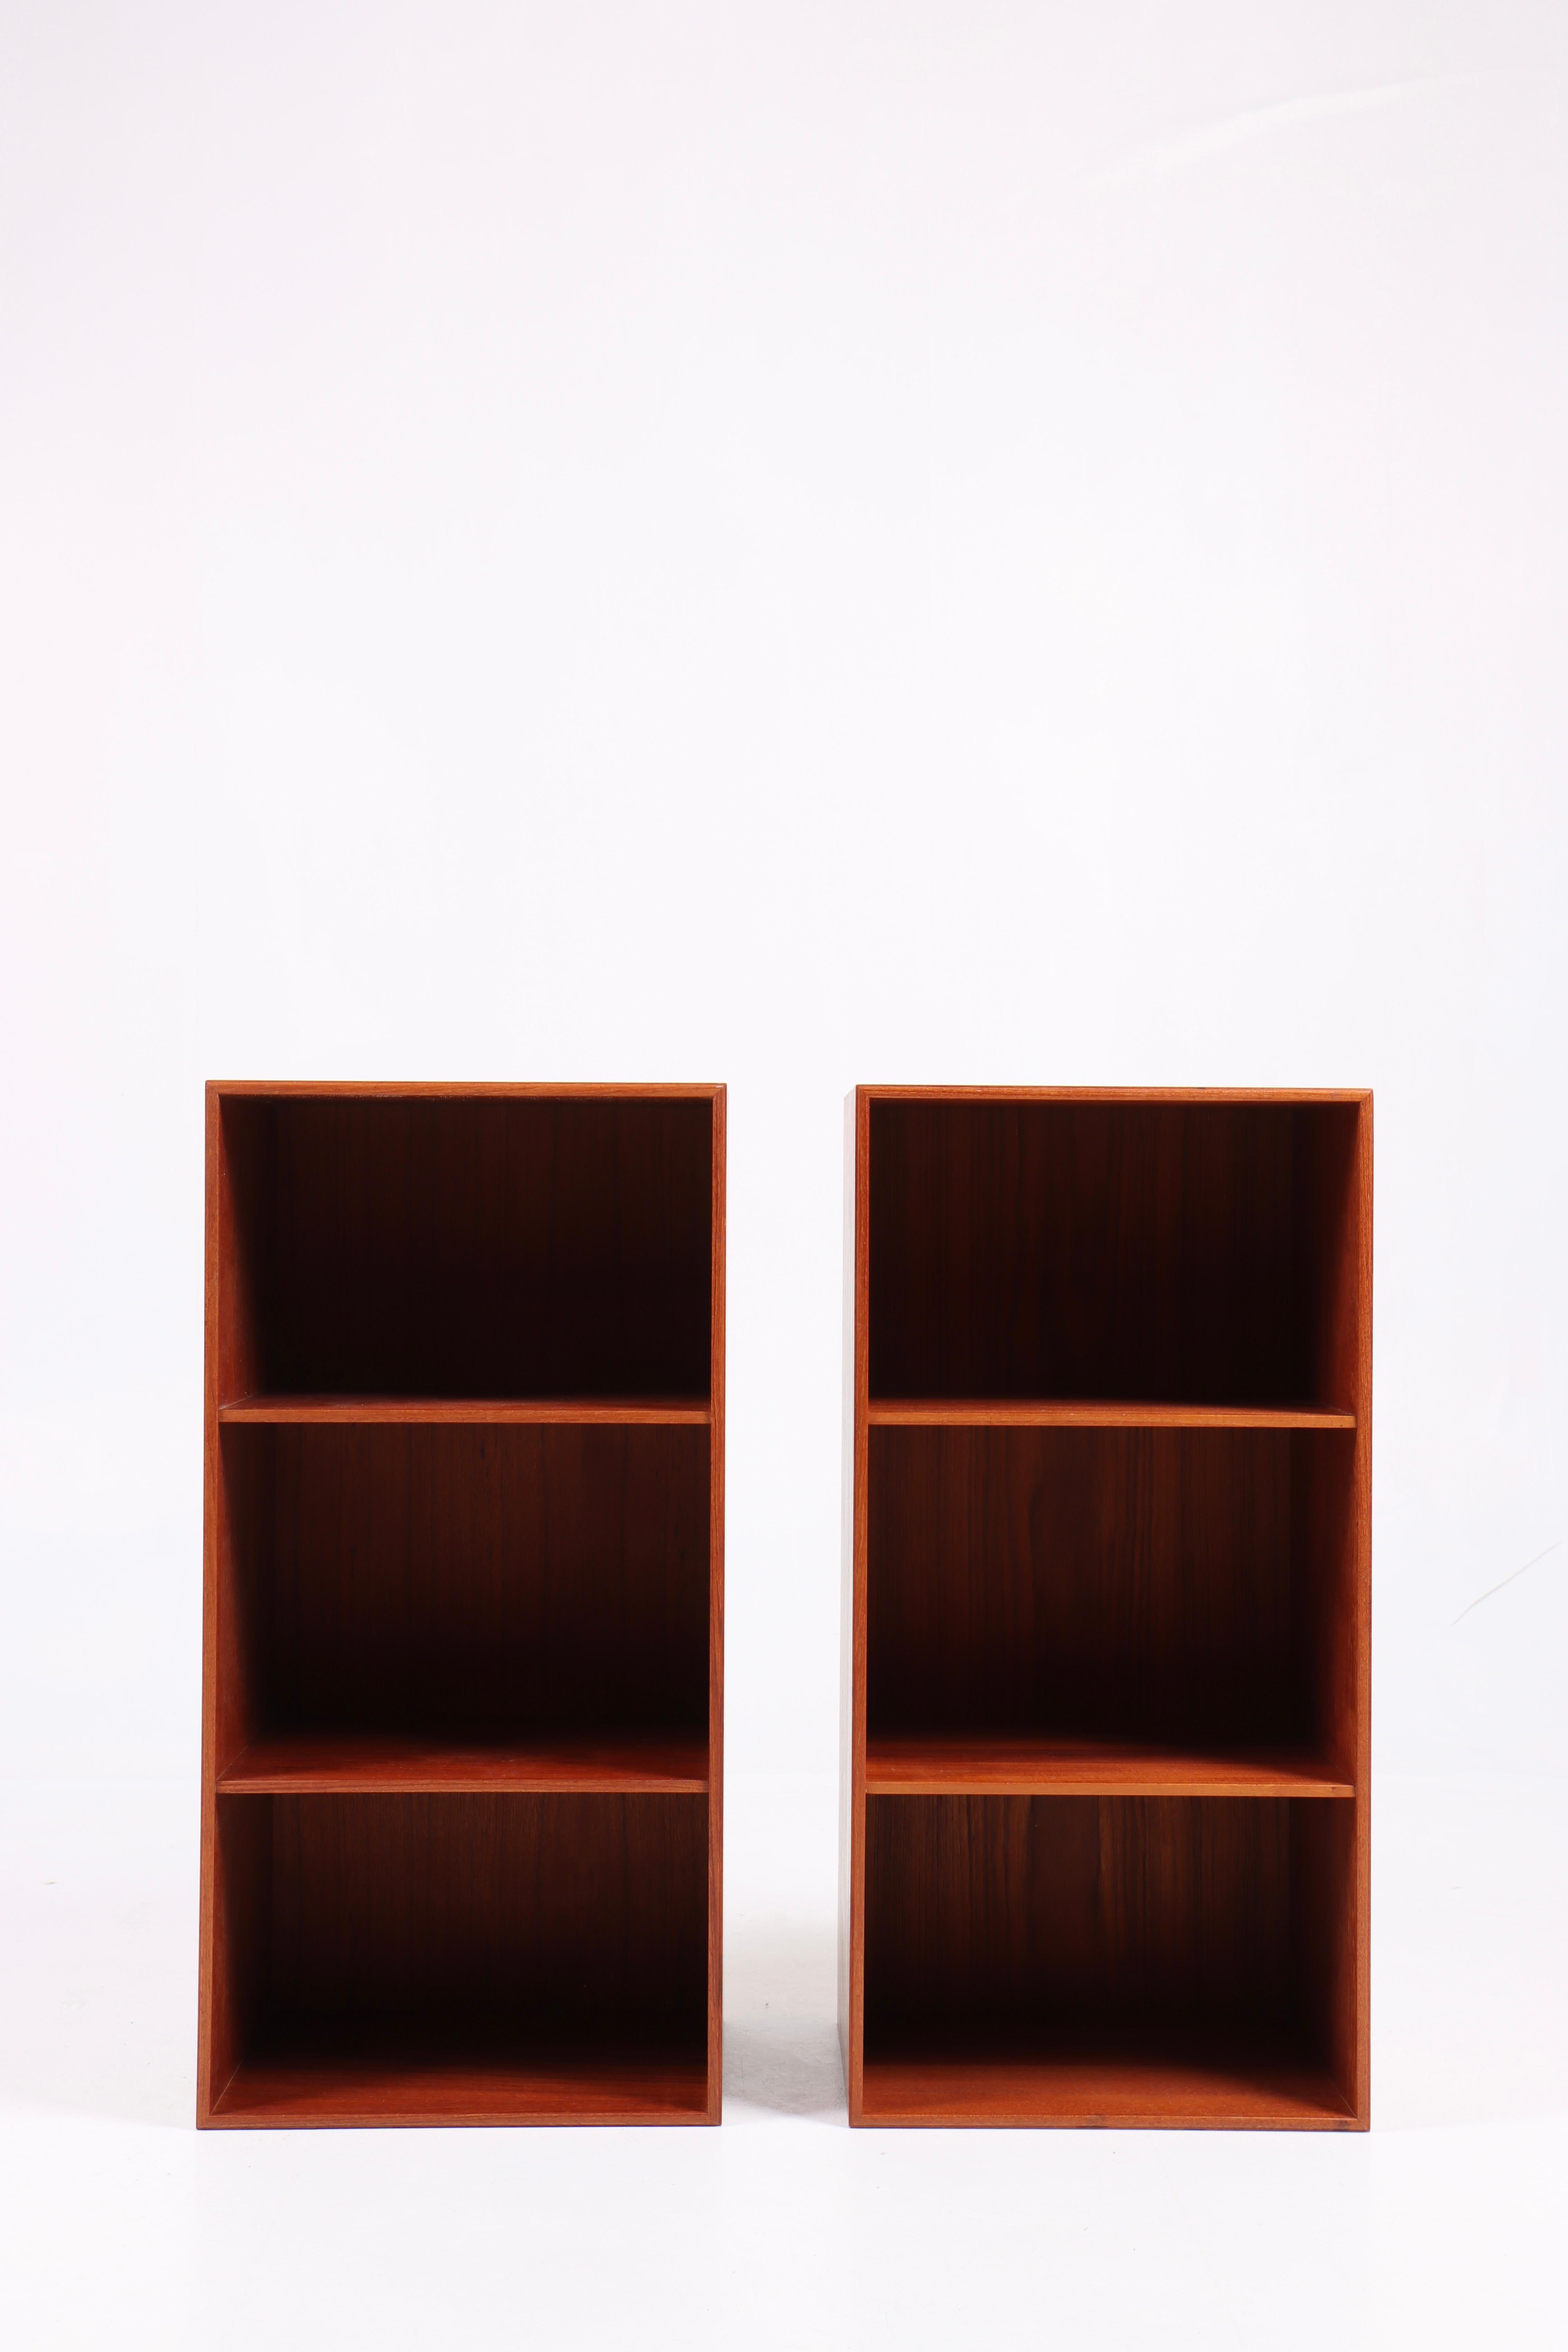 Pair of units in solid Teak. Designed by Mogens Koch for Rud. Rasmussen cabinetmakers in 1933. Made in Denmark. Great original condition.